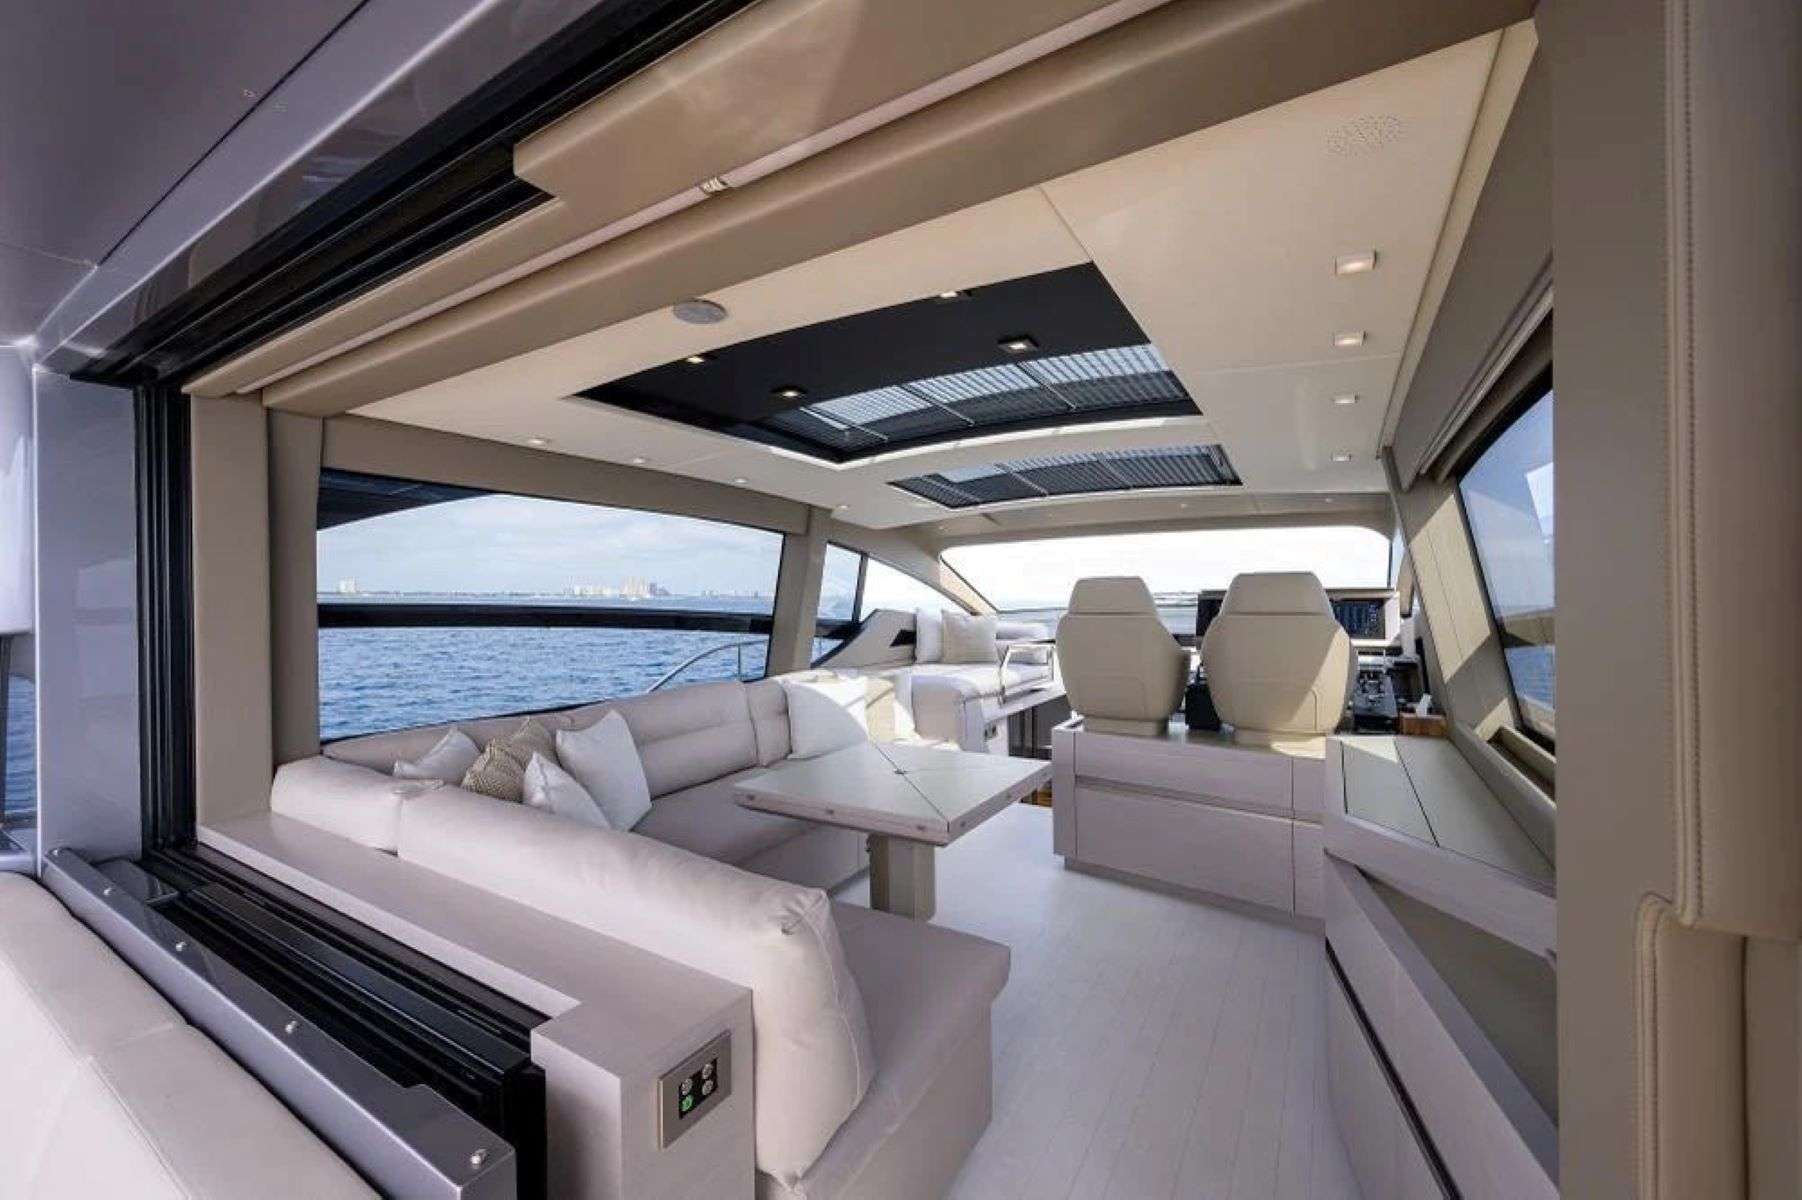 Amici - Yacht Charter Newport & Boat hire in Summer: USA - New England | Winter: USA - Florida East Coast 2